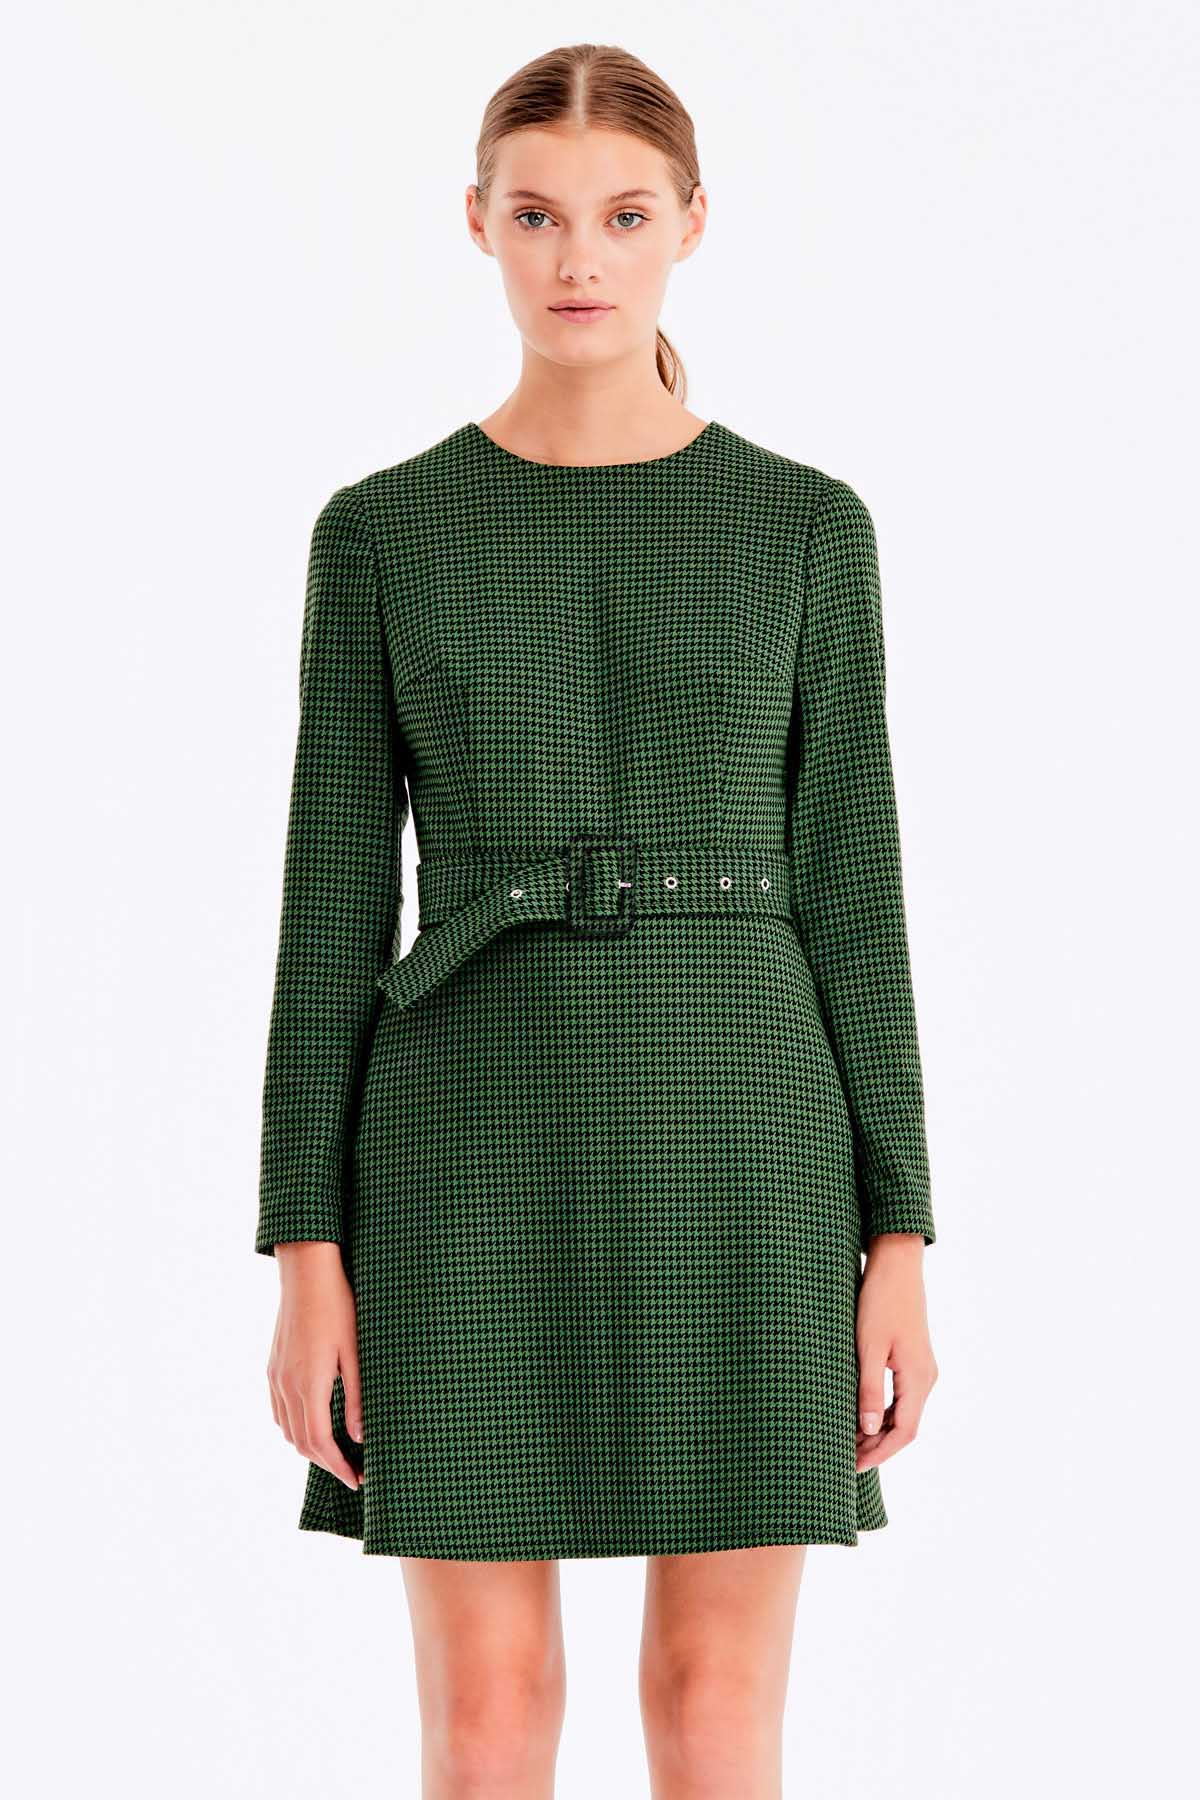 Green dress with a houndstooth print, photo 2